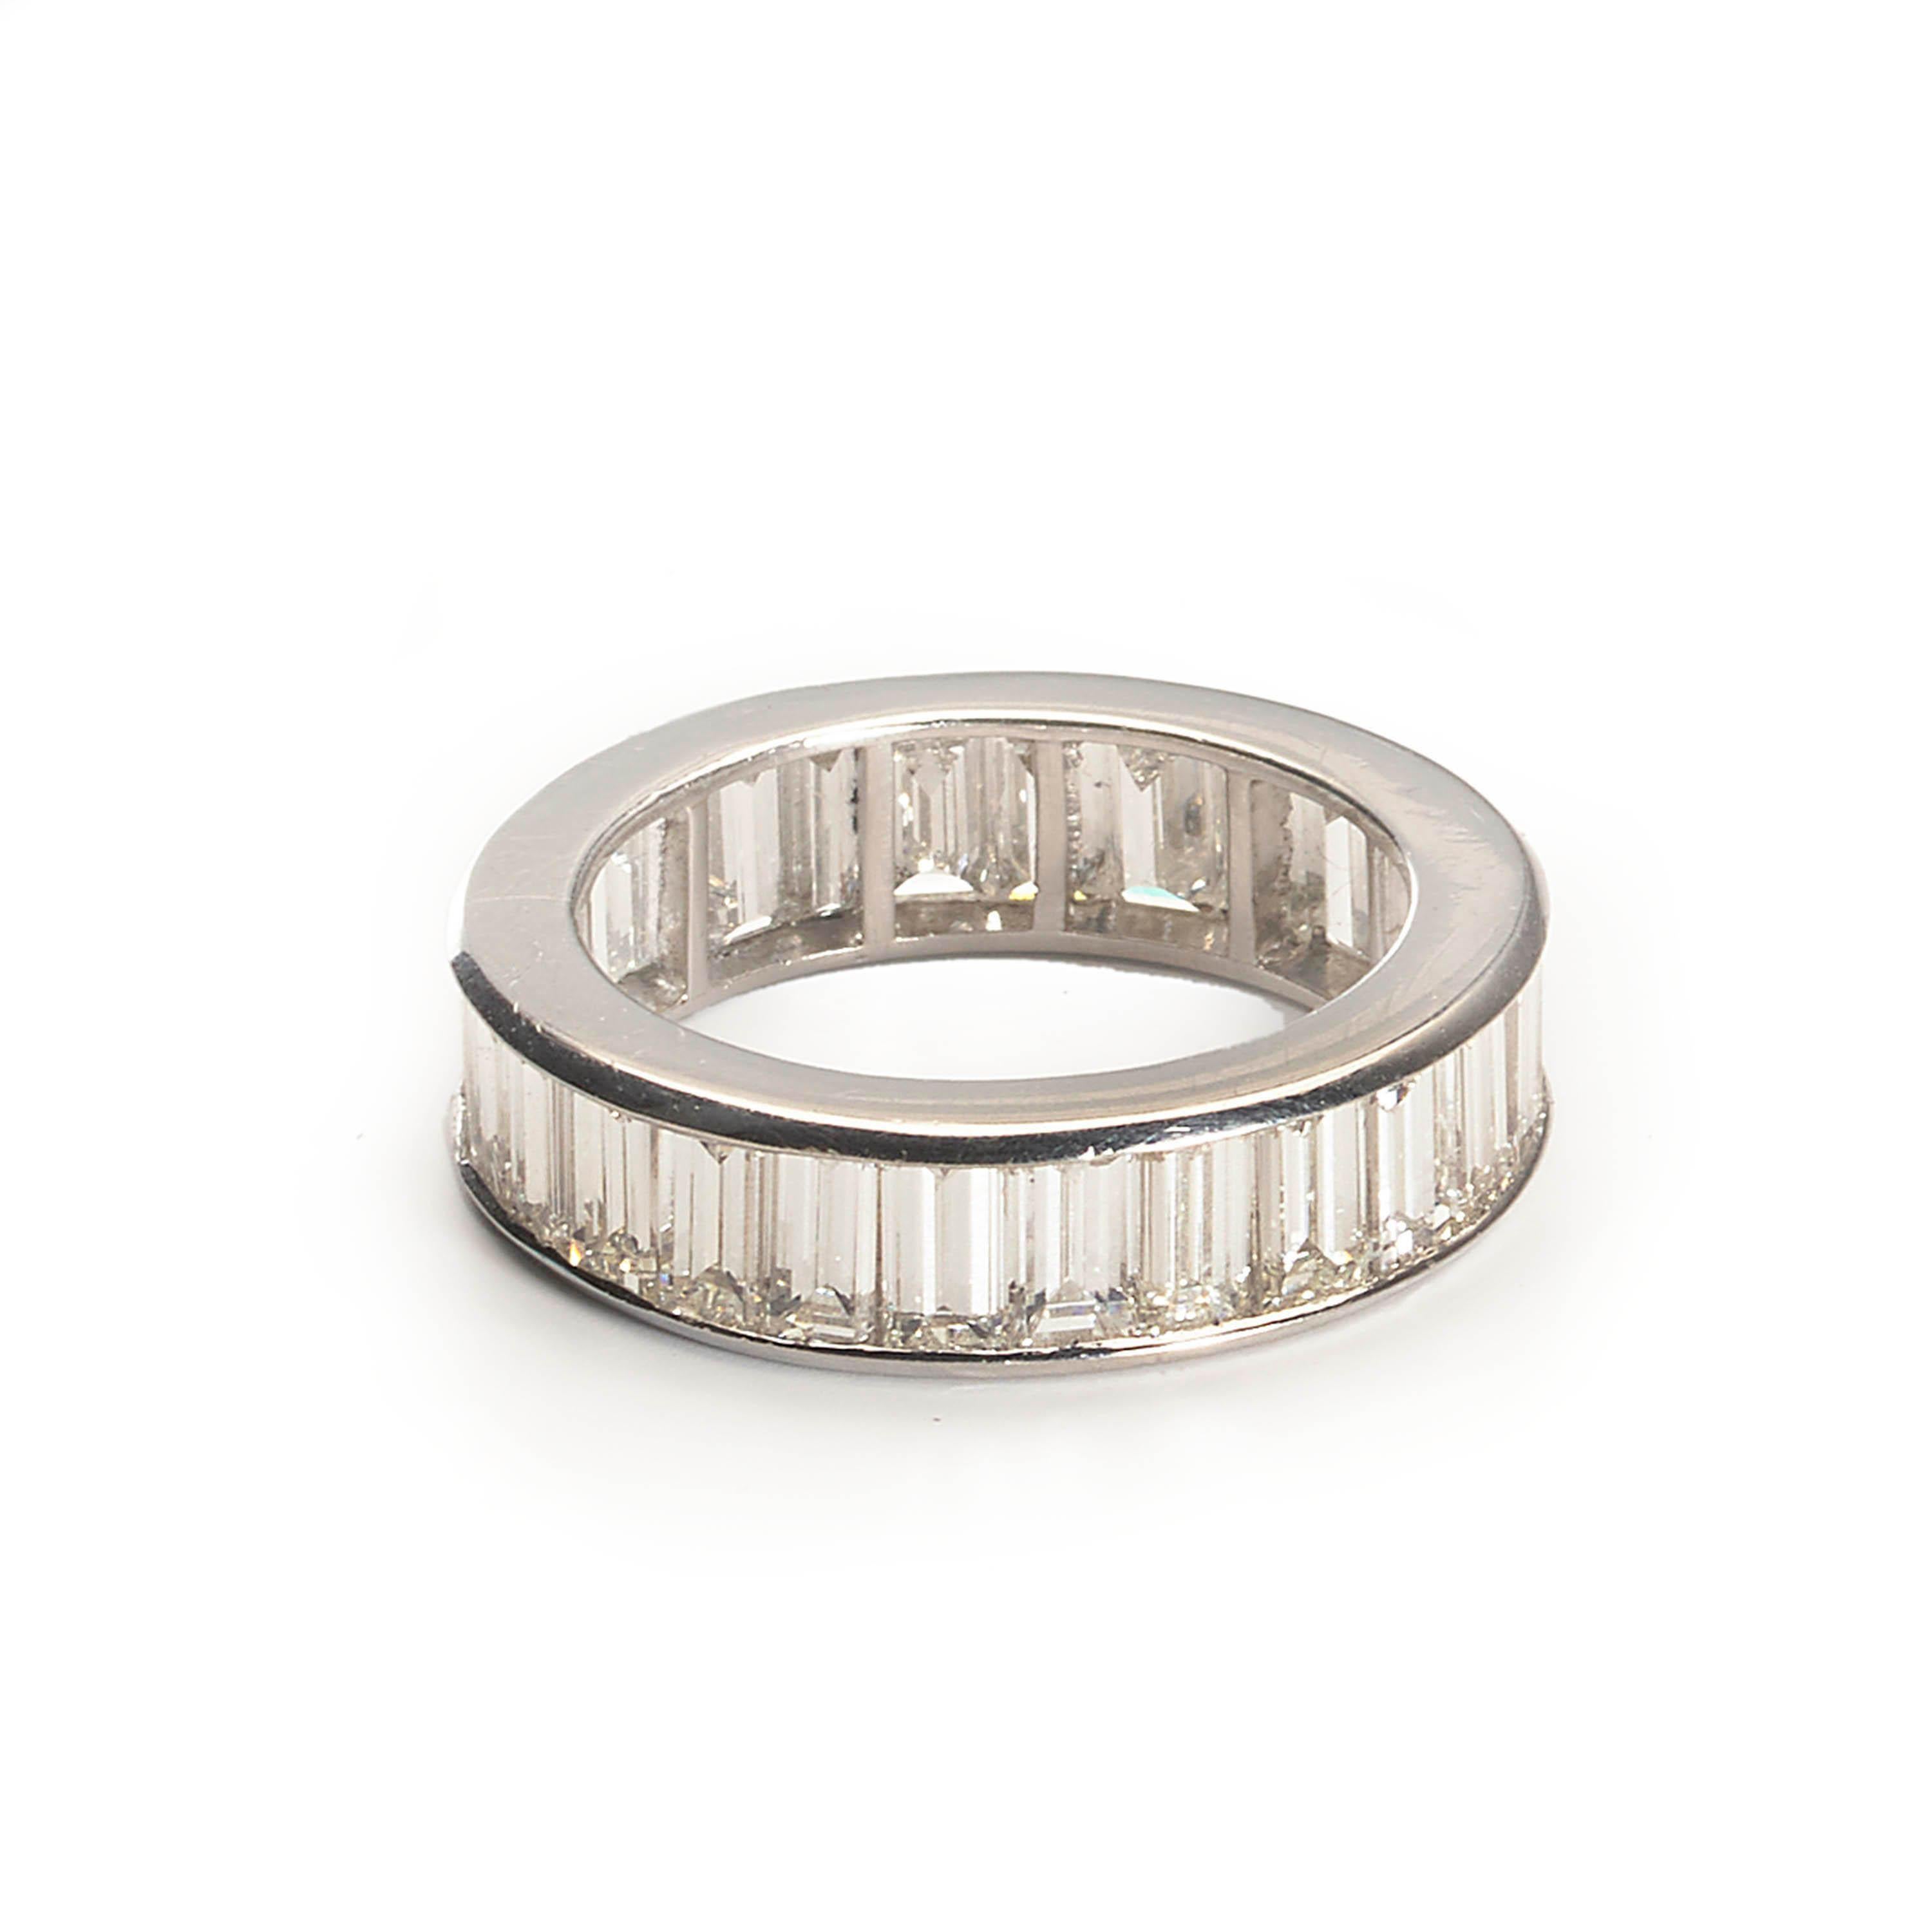 A modern full eternity ring, set with twenty seven baguette-cut diamonds, weighing an estimated total of 6.00 carats, channel set and mounted in platinum.